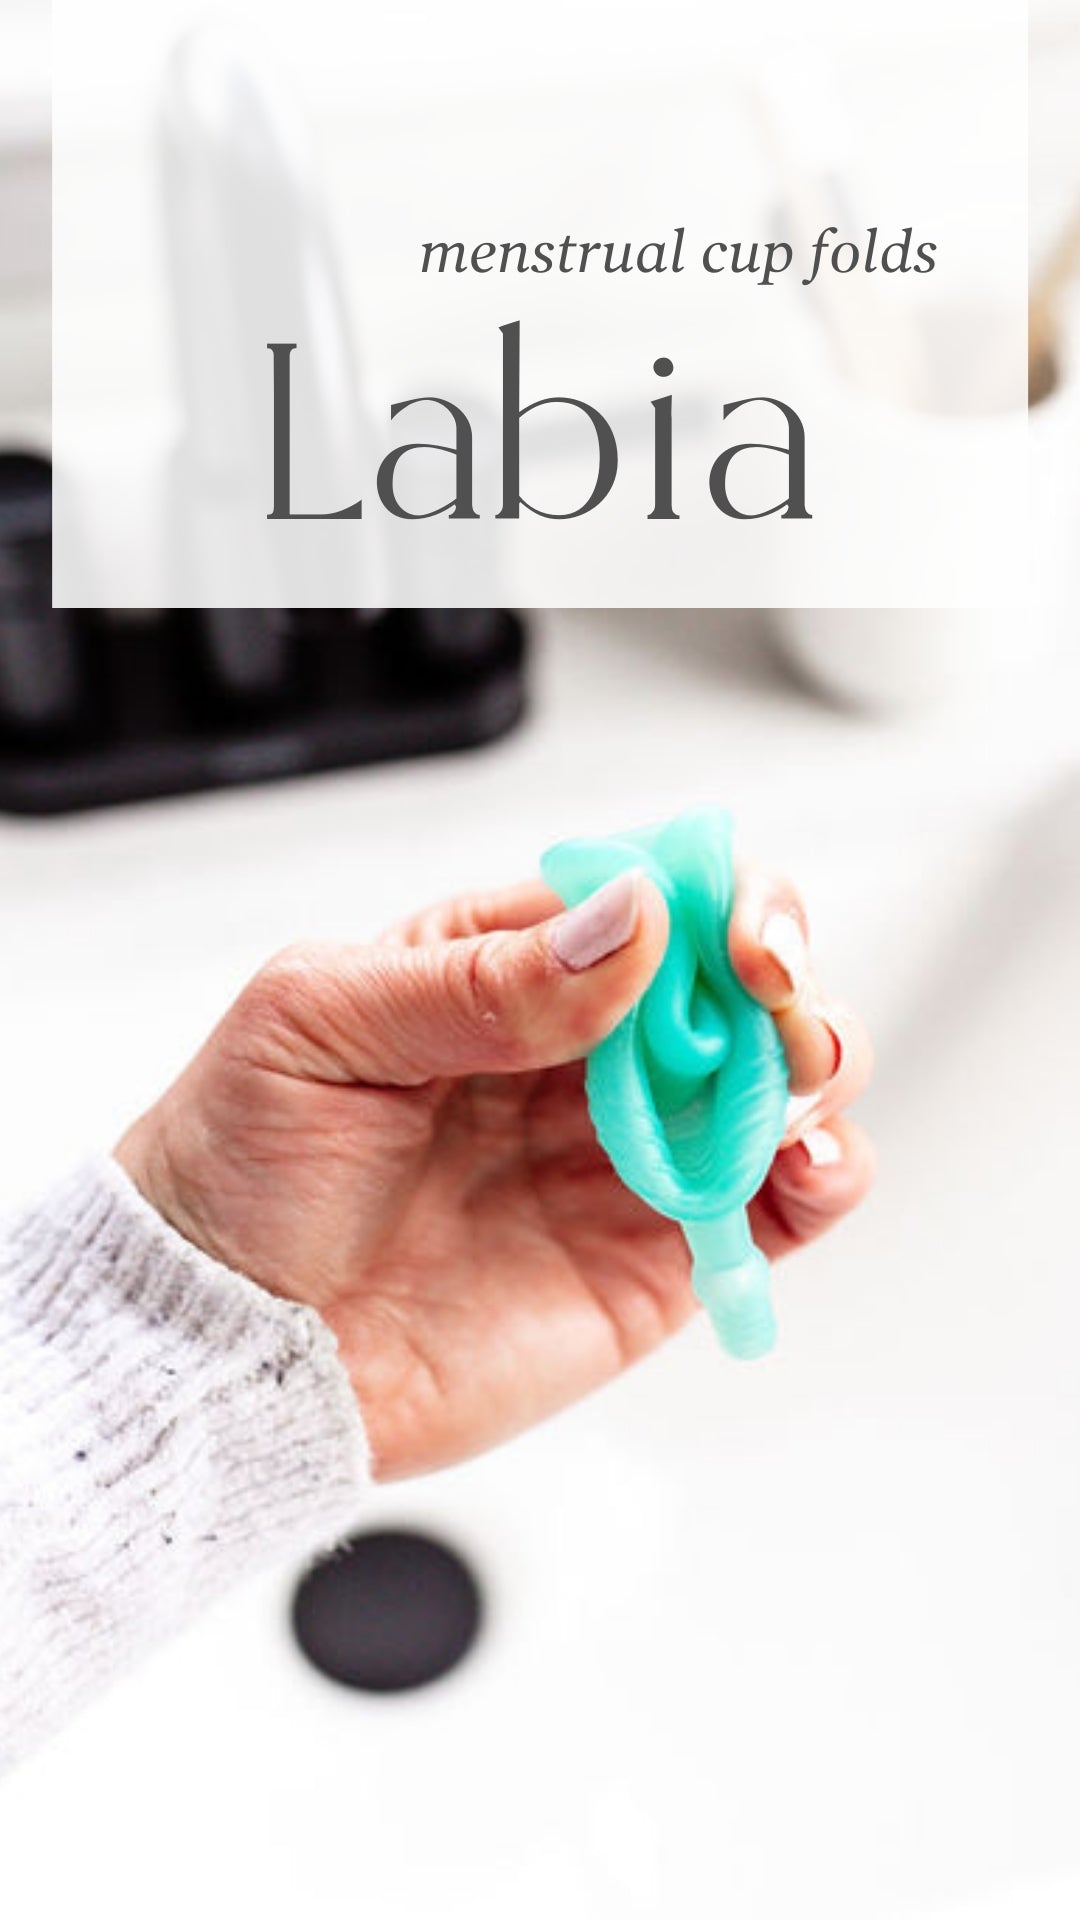 Labia Fold for Menstrual Cup